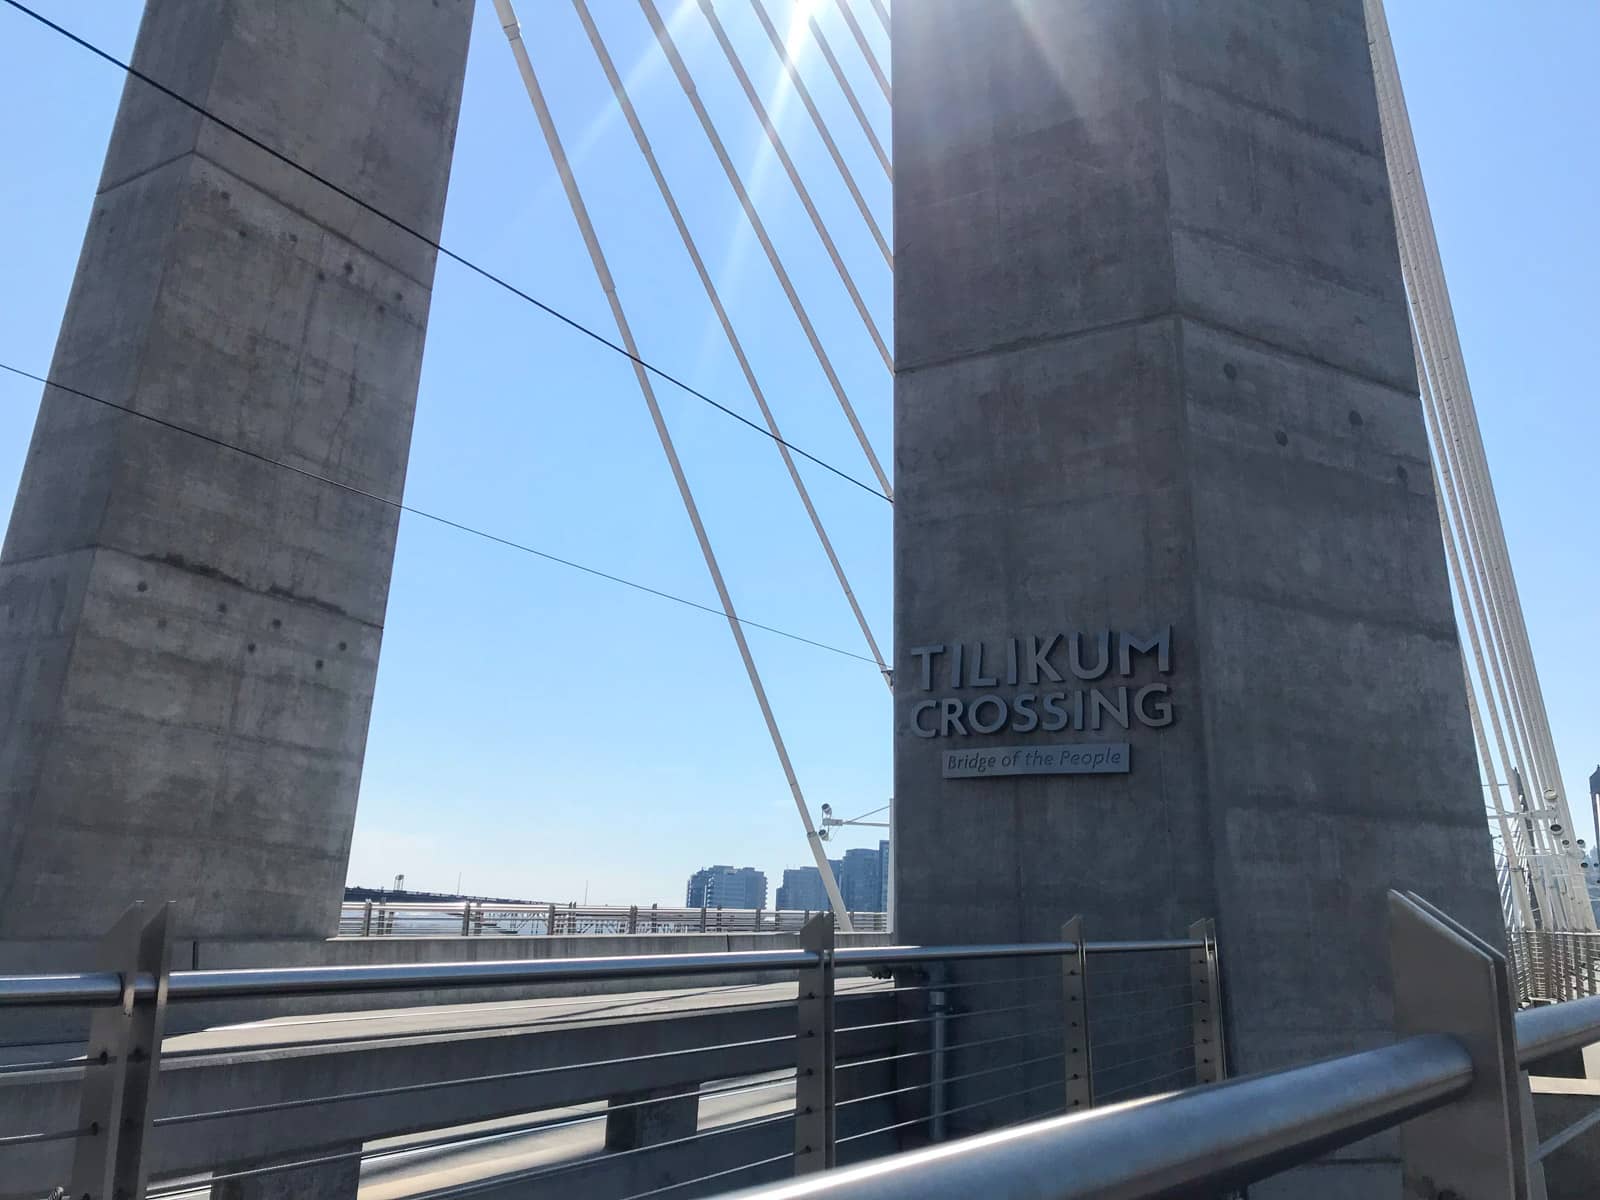 The large pylons of a bridge, with a sign reading “Tilikum Crossing: Bridge of the People”.